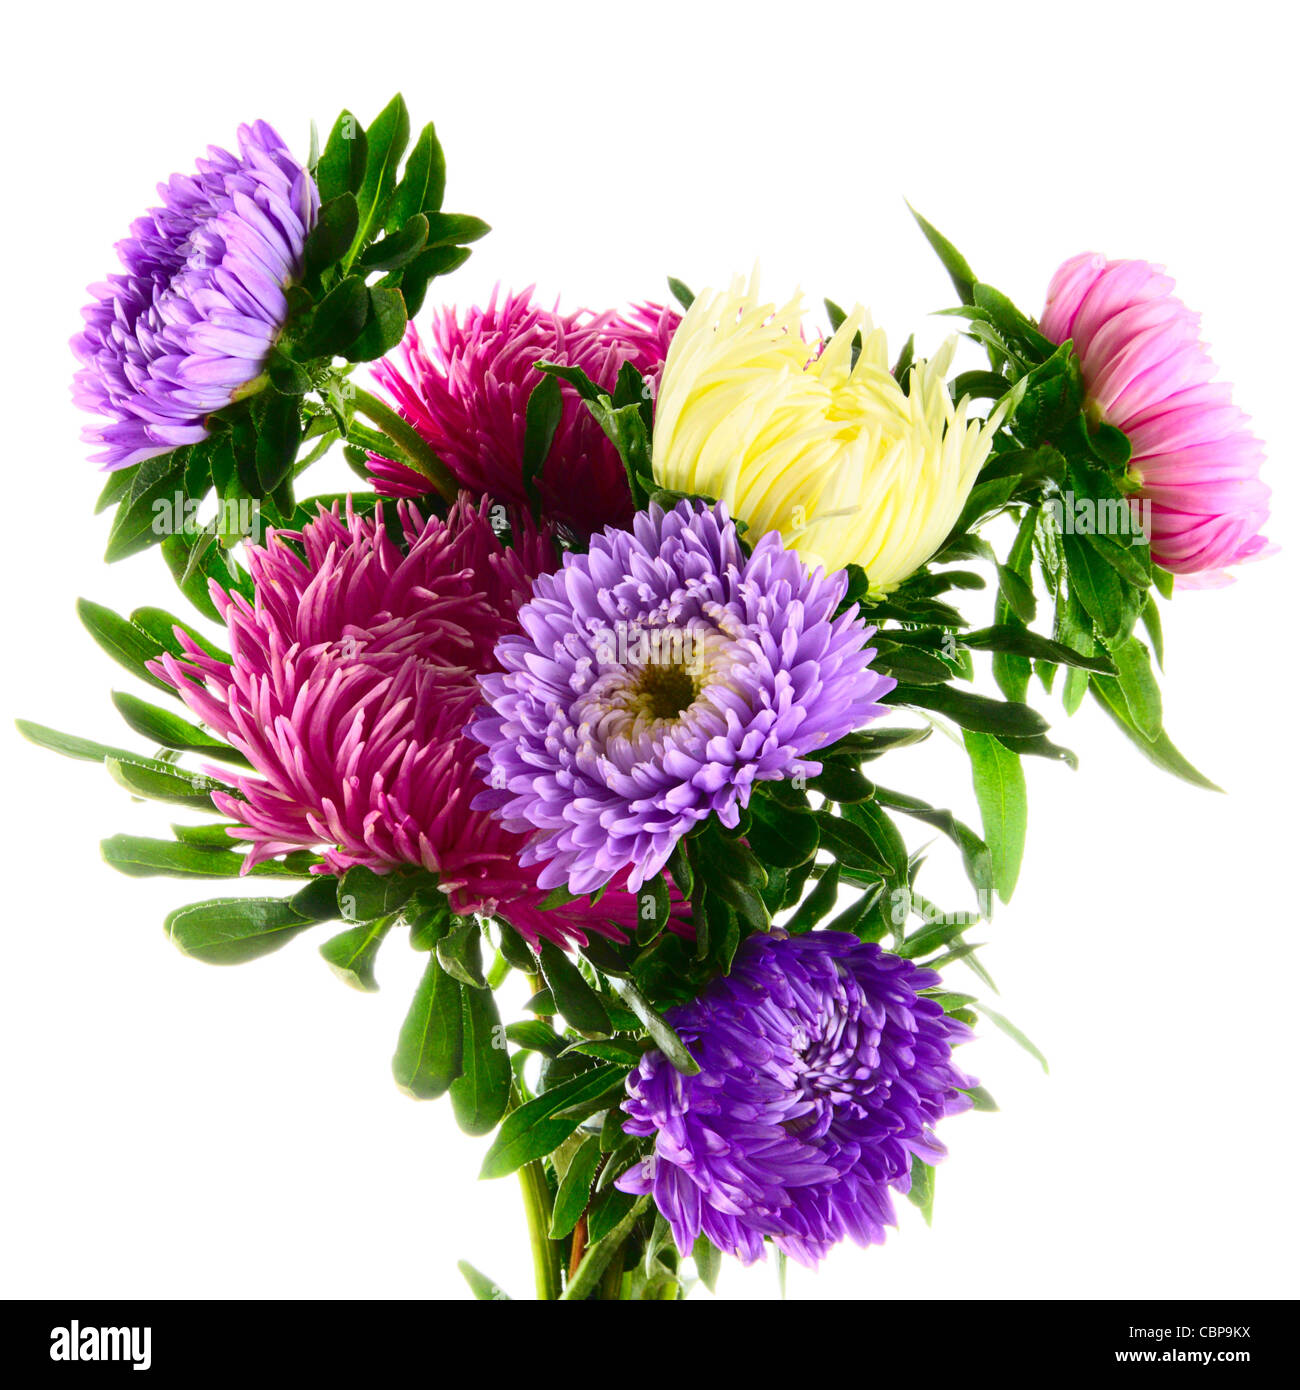 Asters on a white background Stock Photo